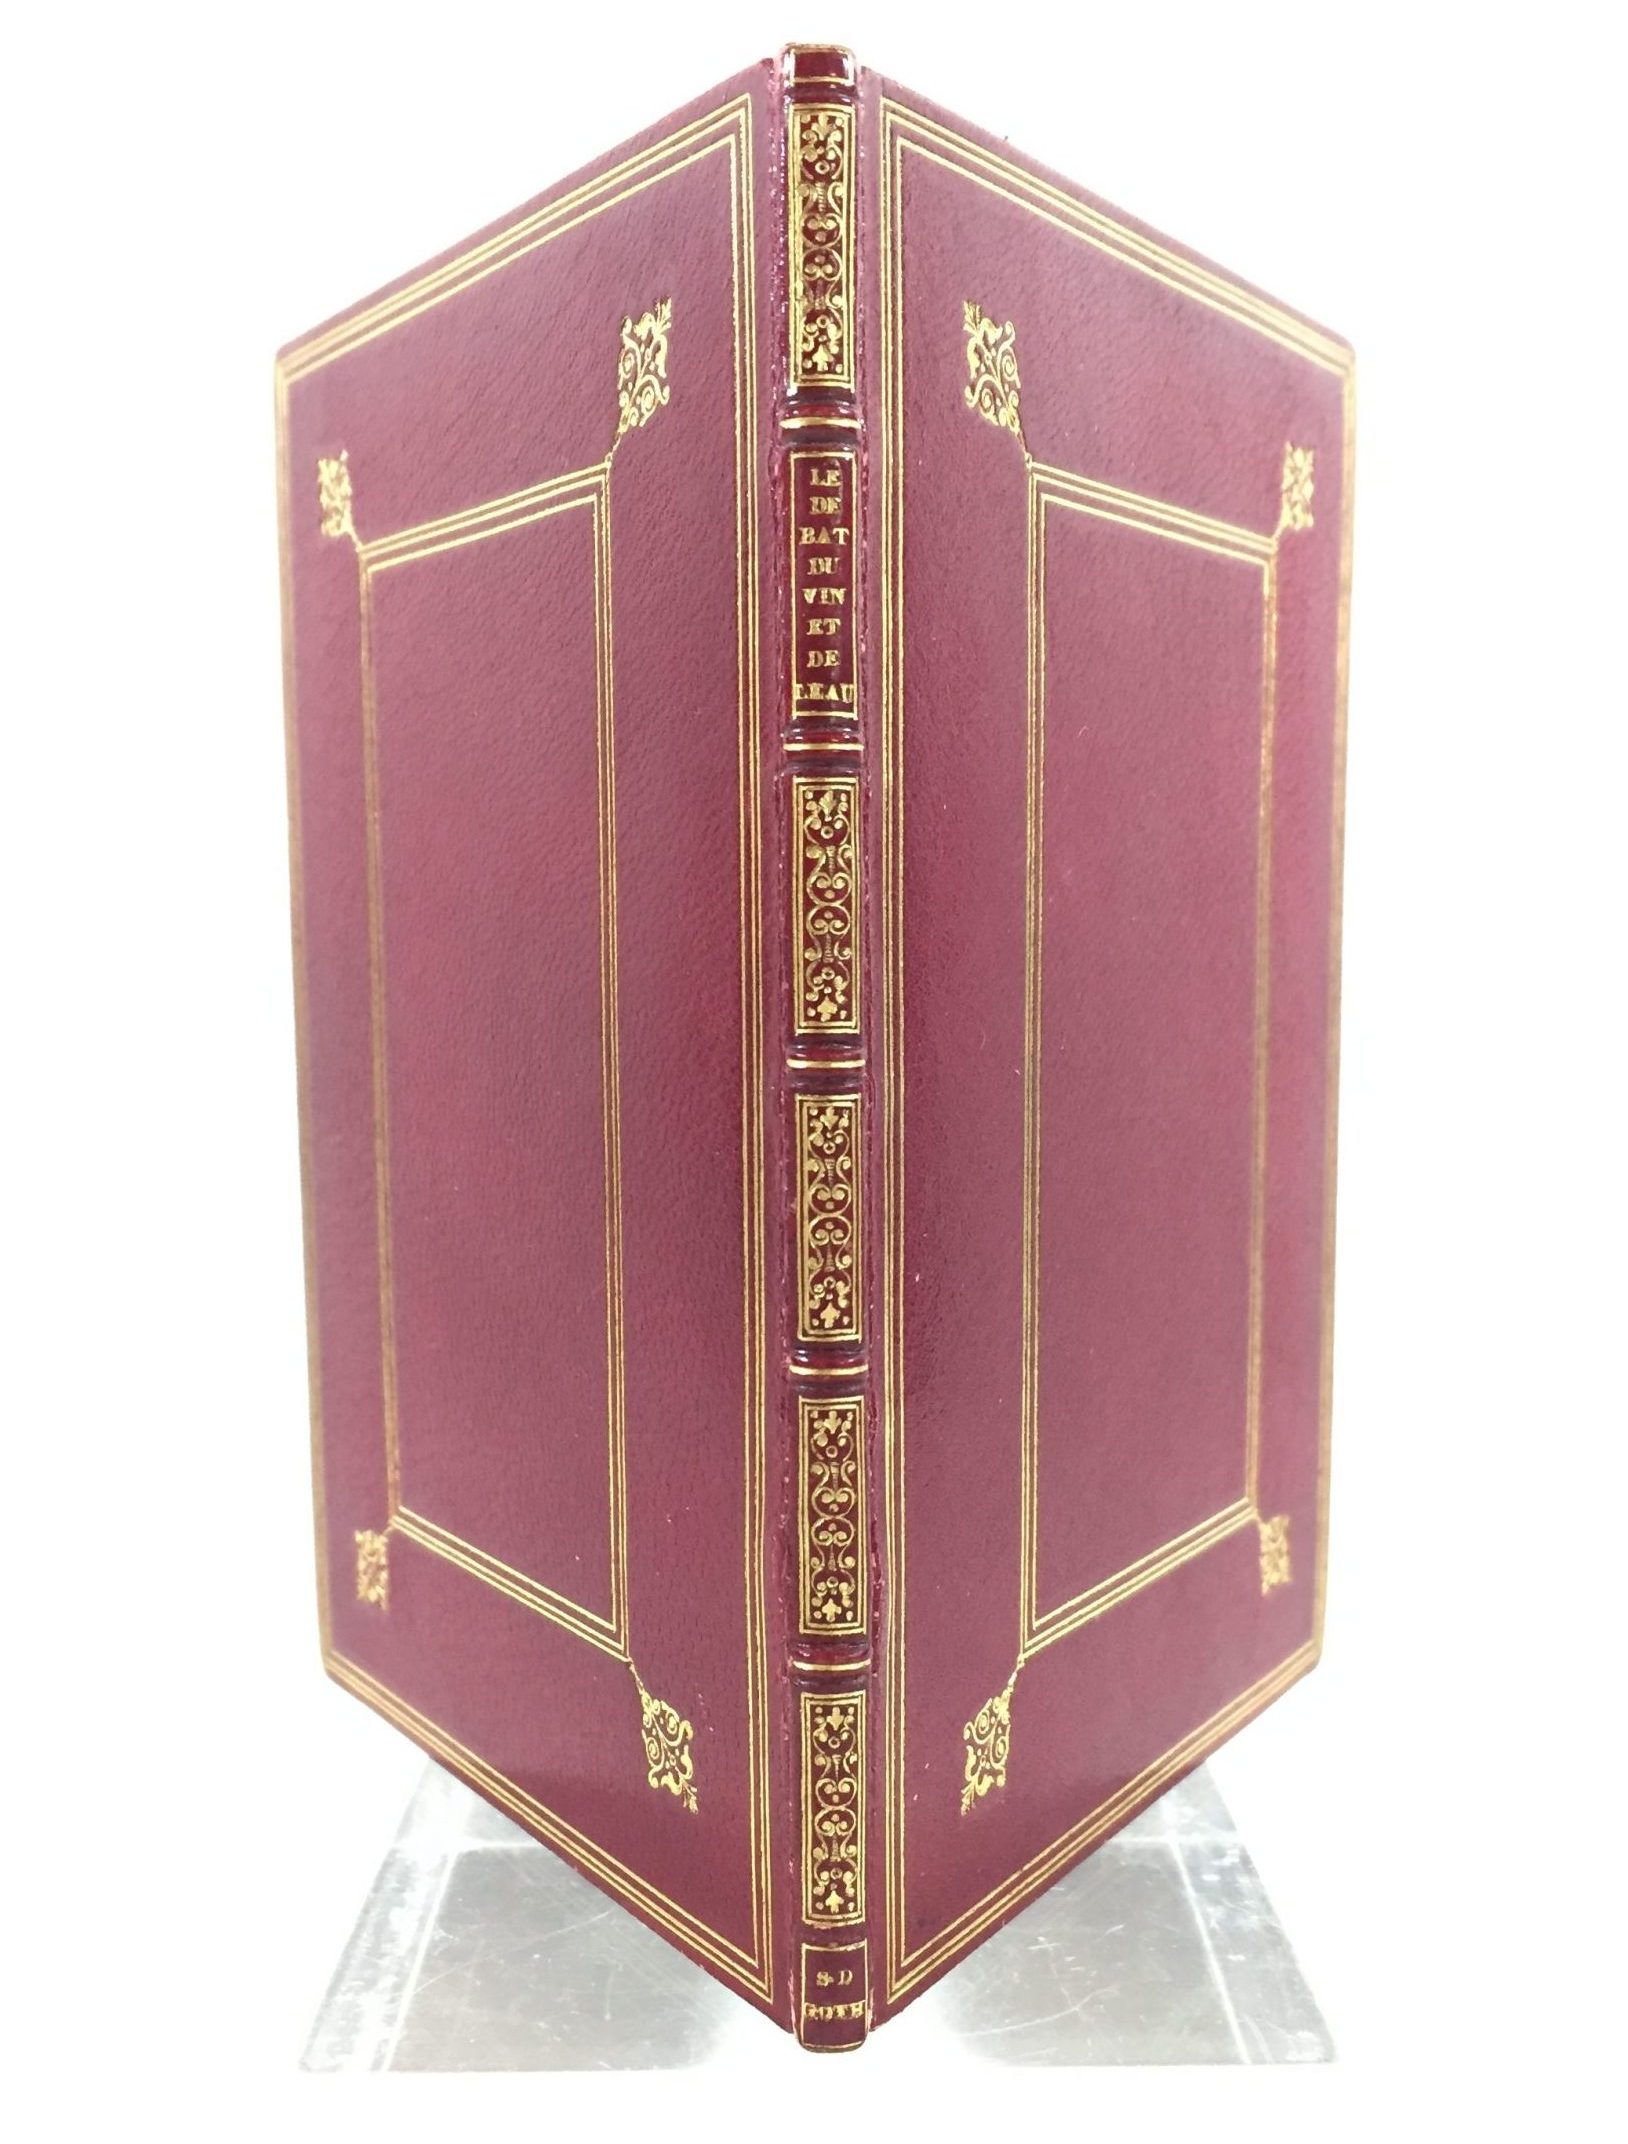 red cover of partially open rare book with gold trim